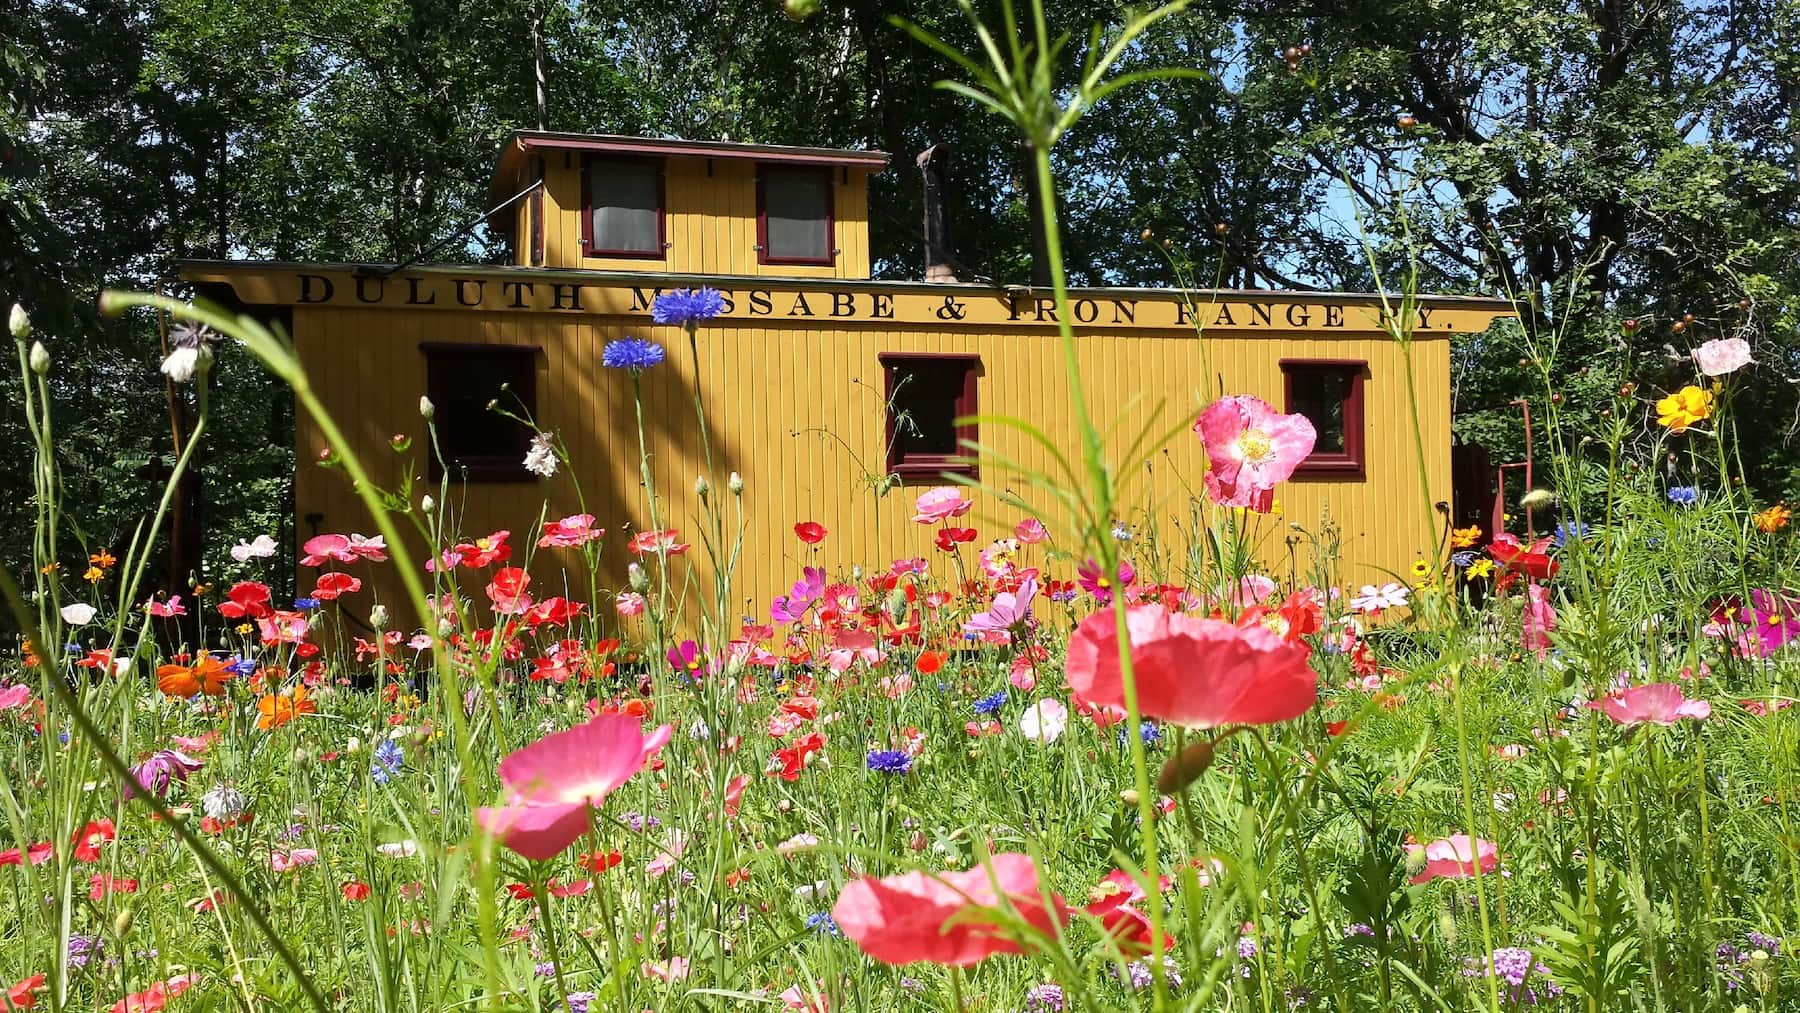 Wildflowers blooming in front of Goldie the Caboose train car glampsite.